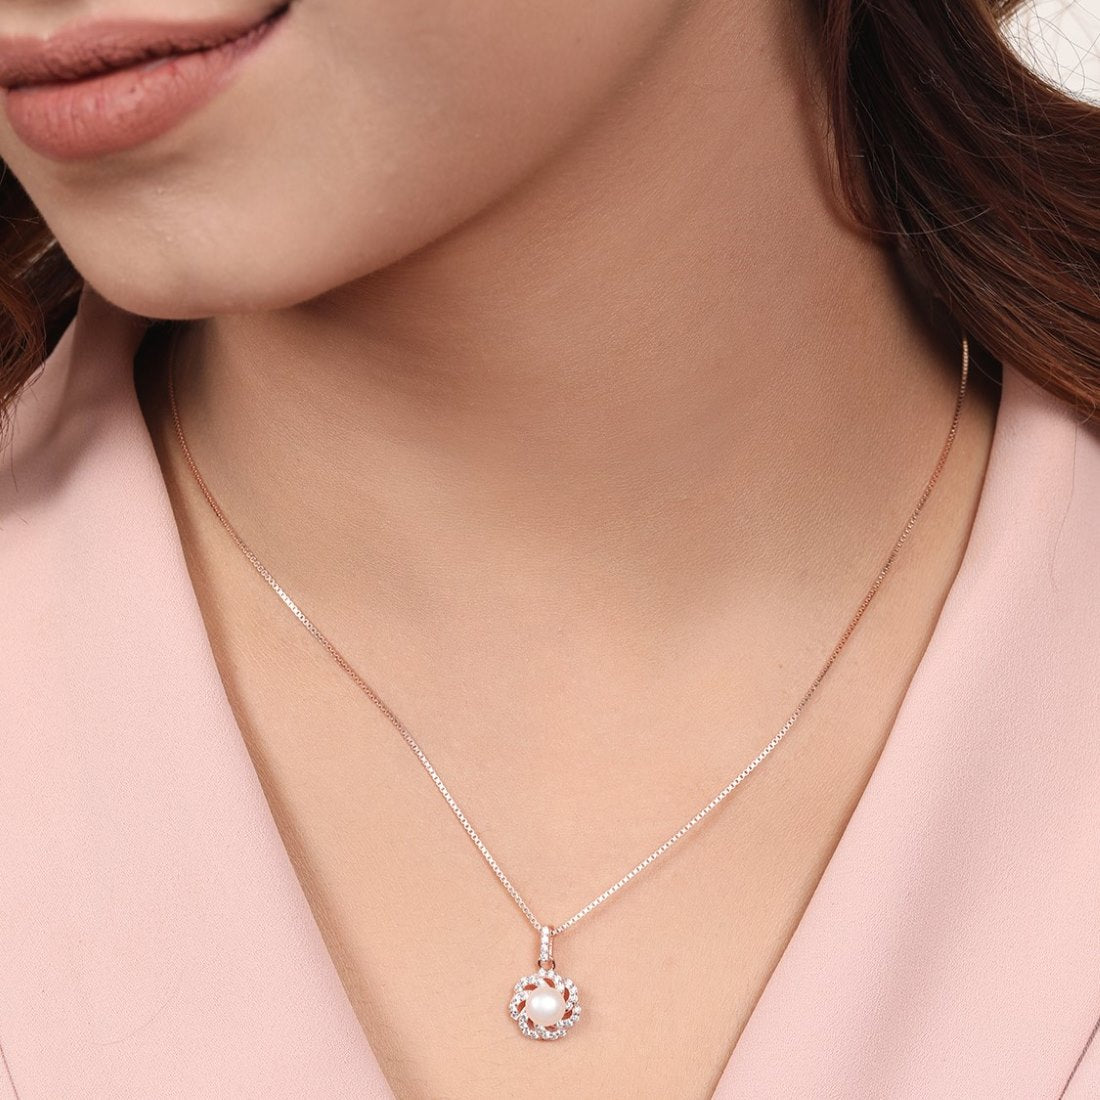 Petals of Grace Rose Gold-Plated 925 Sterling Silver Pearl Pendant with Chain